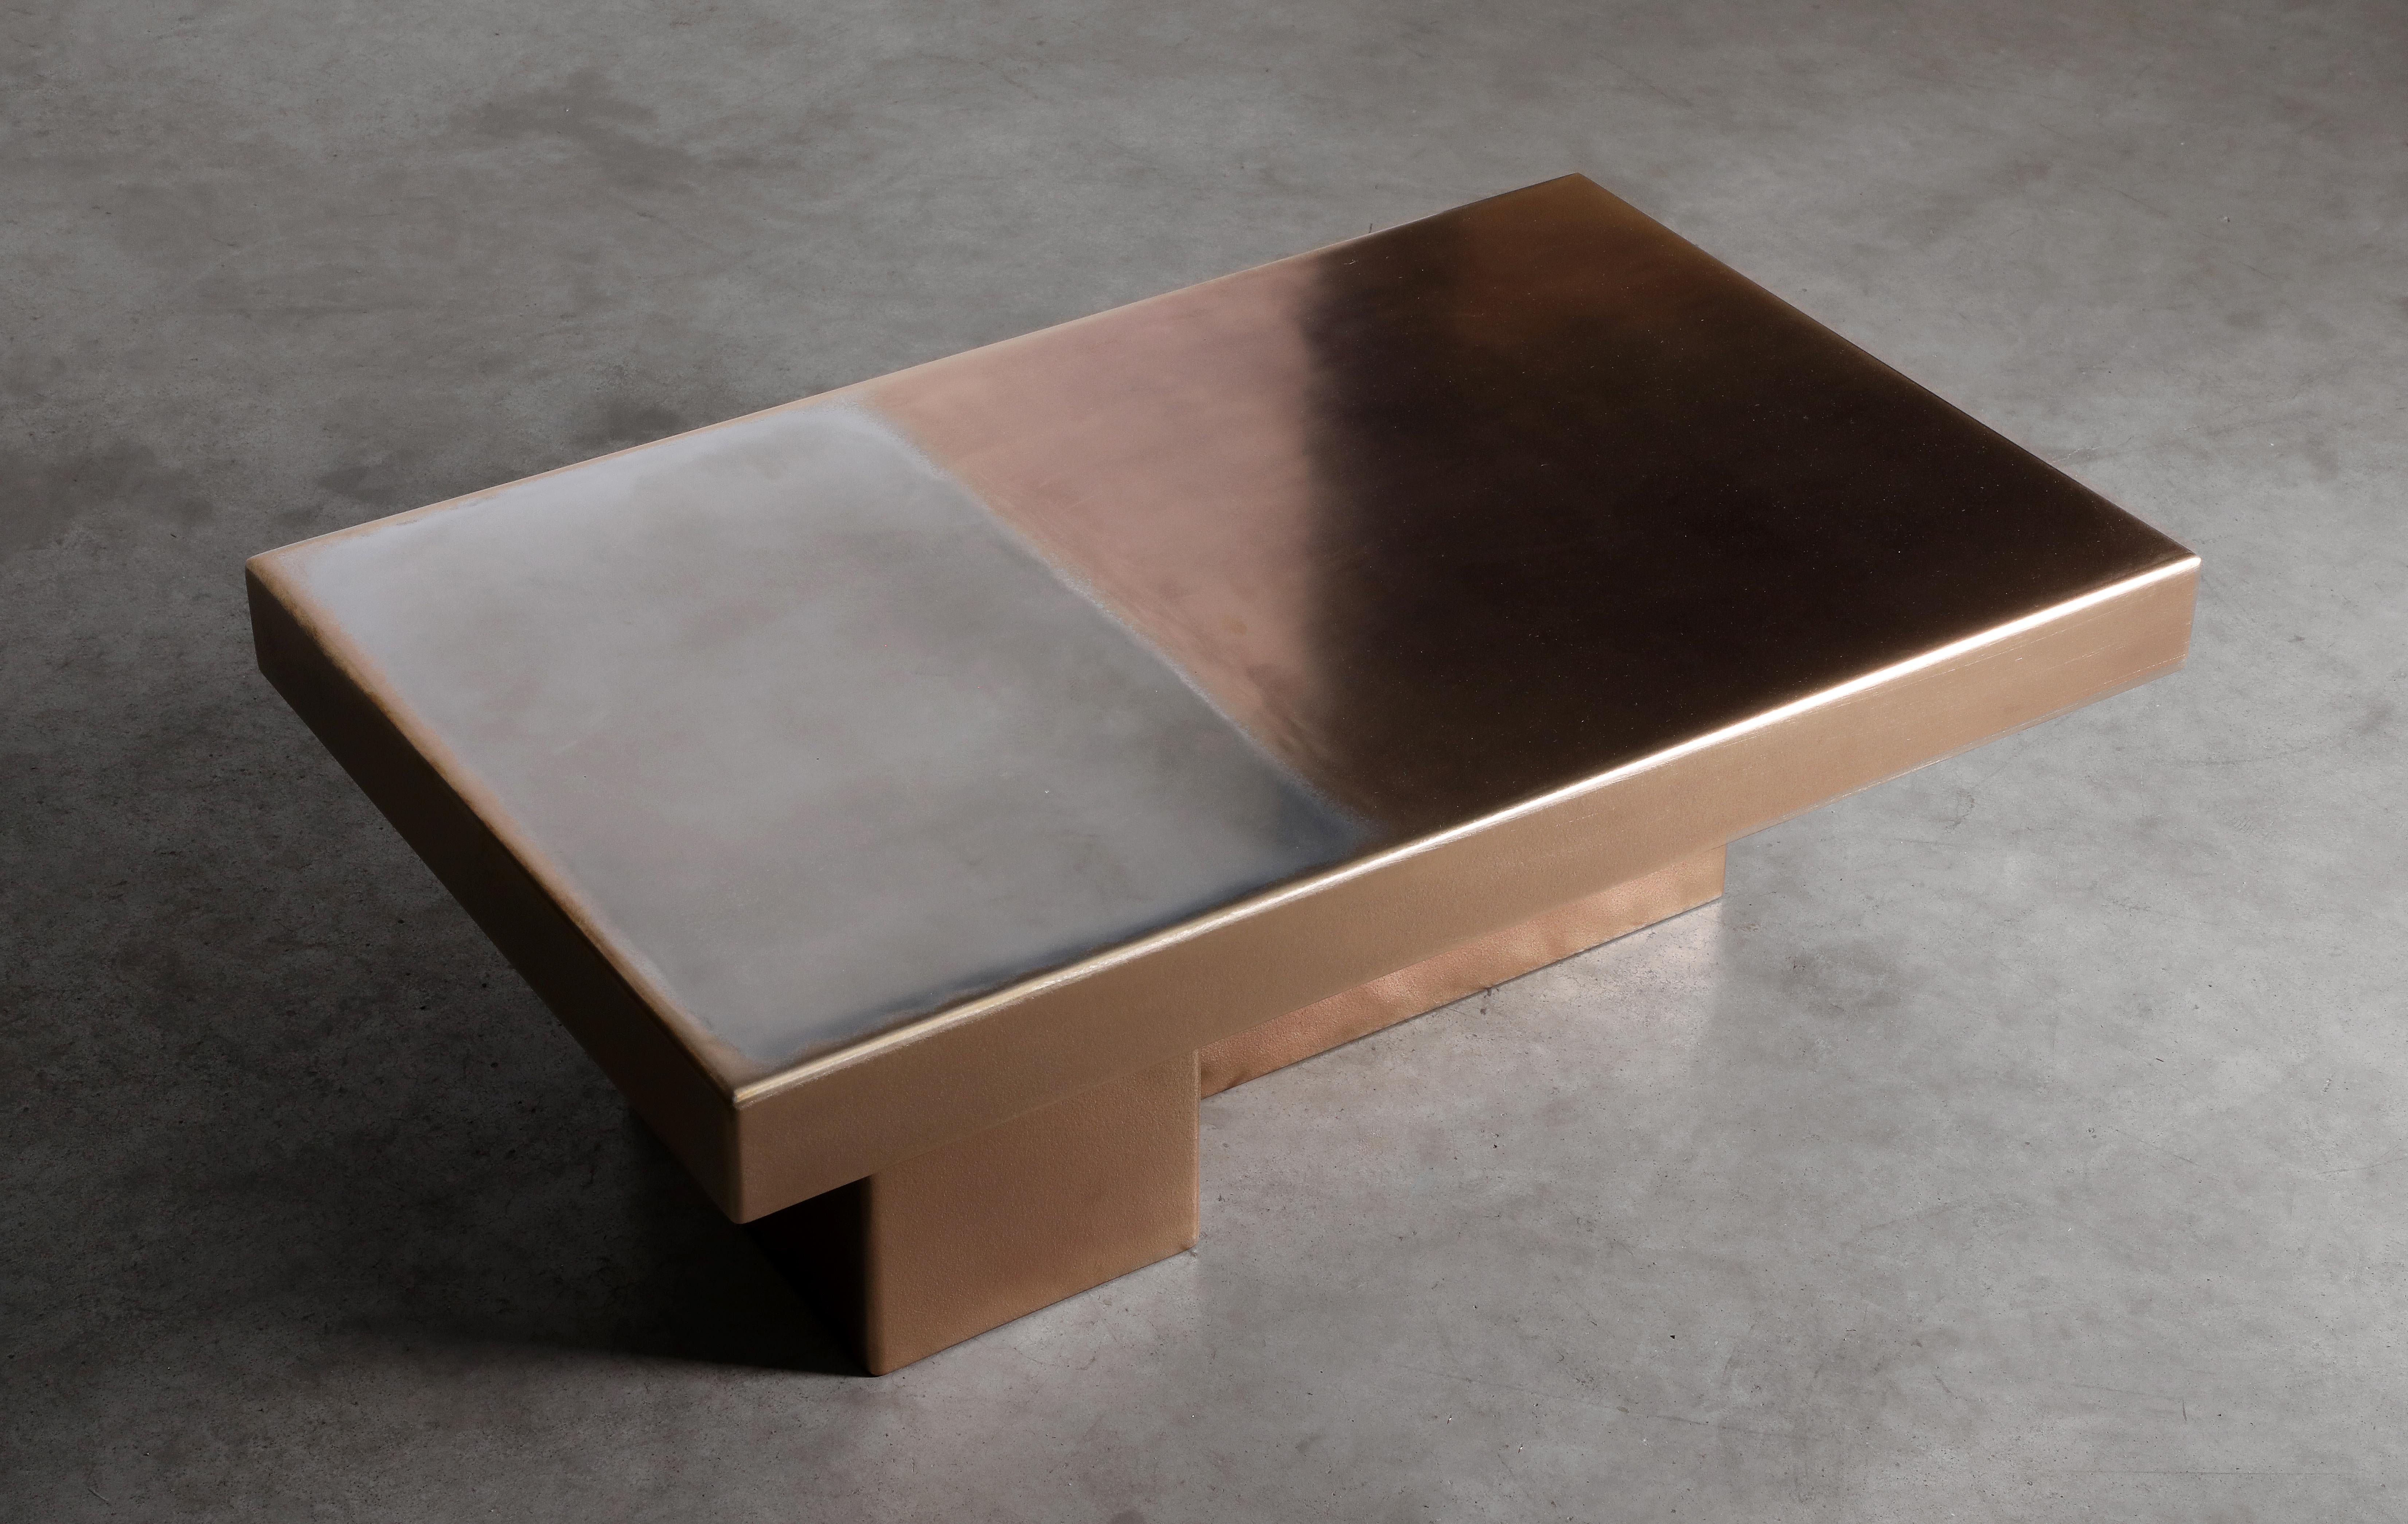 Hand-Crafted Marcin Rusak, Merging Metals Coffee Table 100-1, Bronze/Zinc Finish For Sale